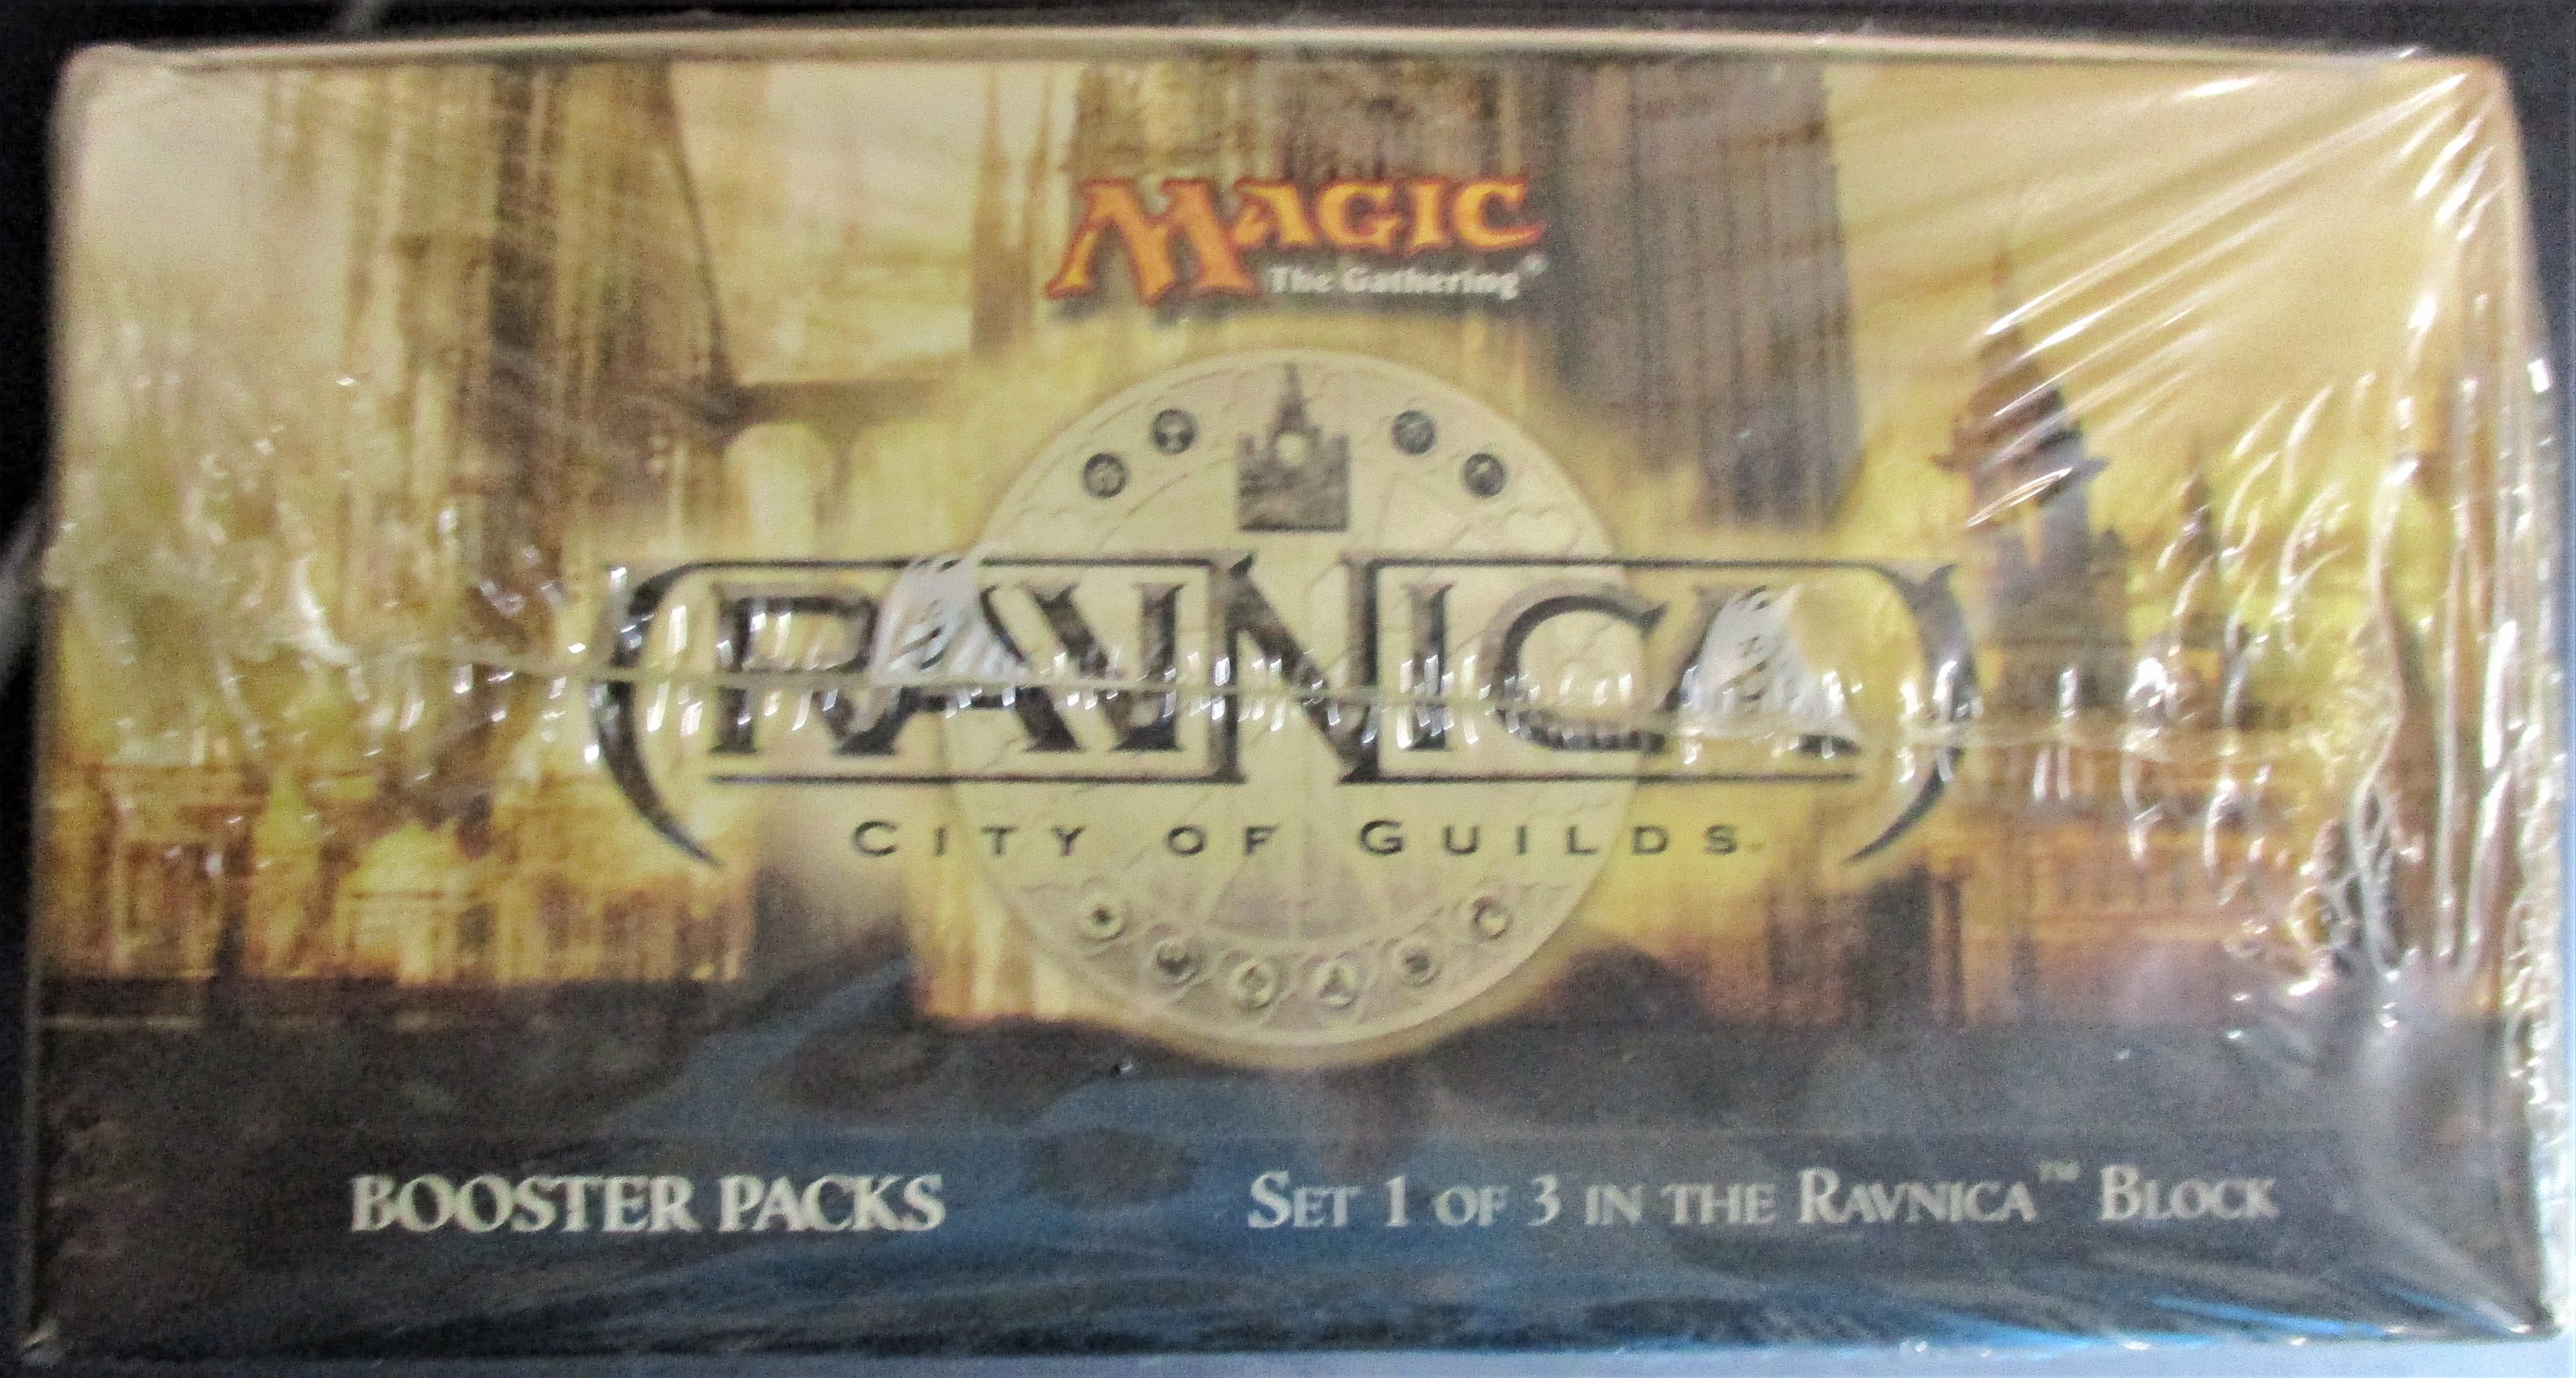 Ravnica City of Guilds Booster Box SEALED